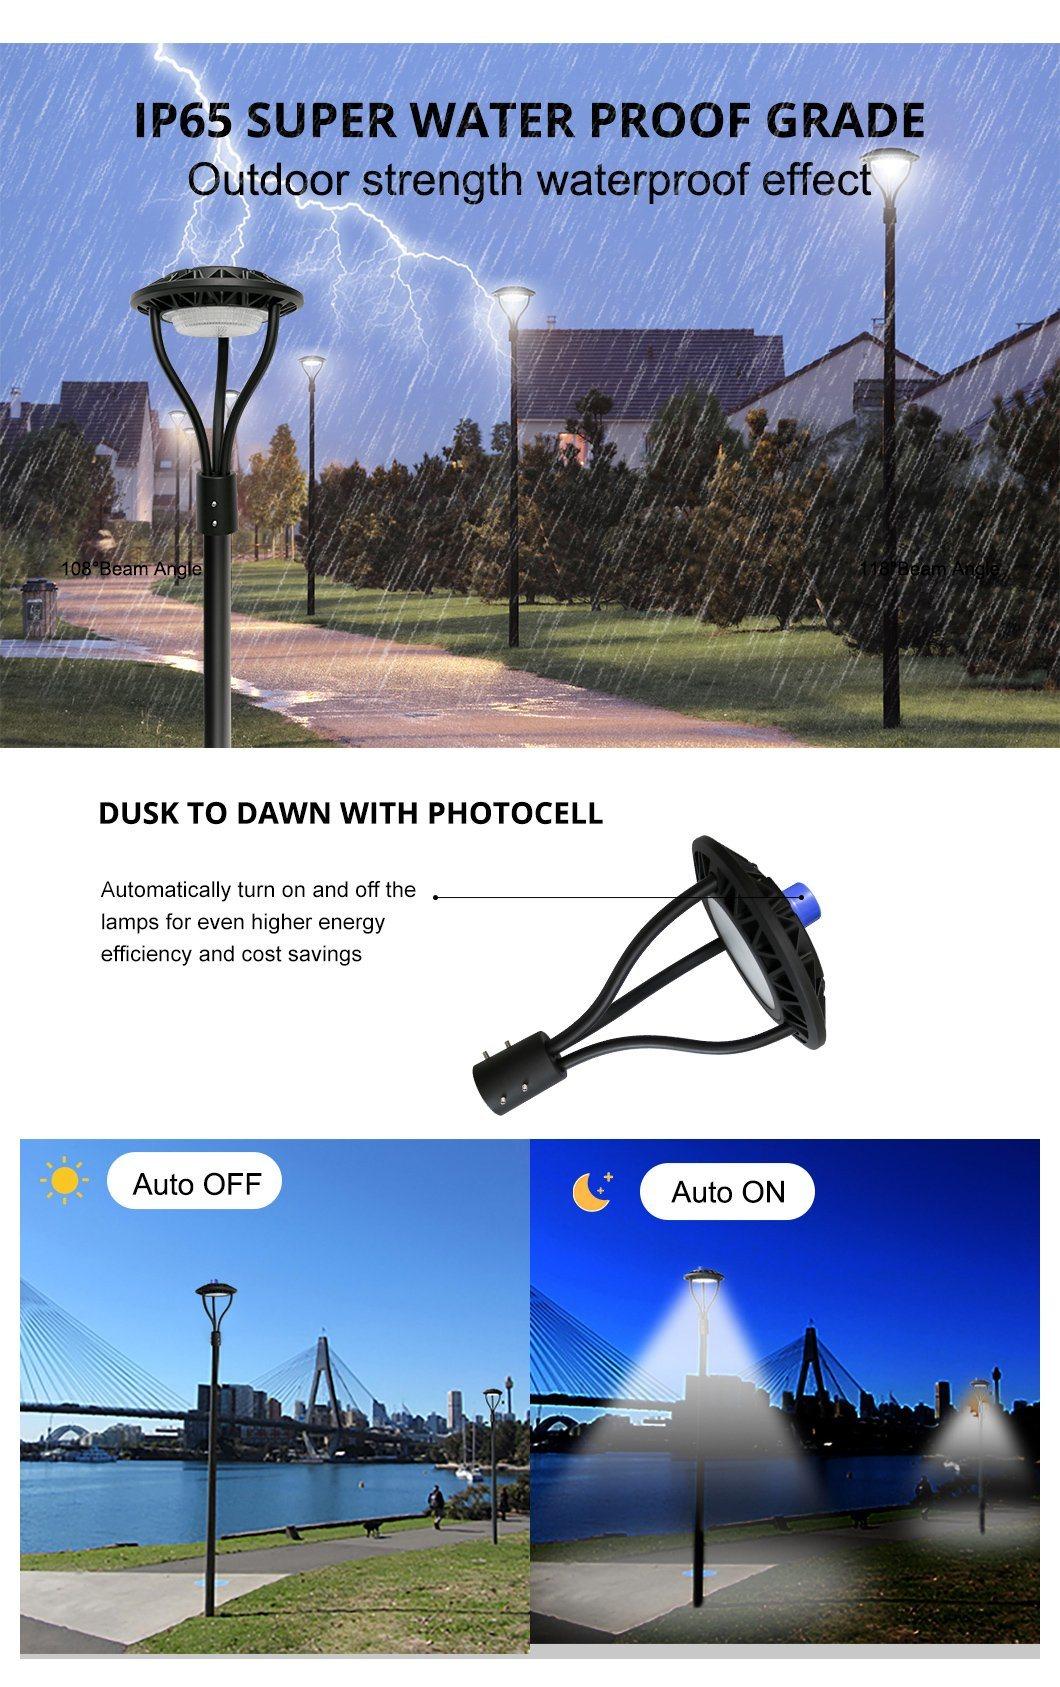 Post Top LED Lights with 150W 130lm/W and ETL IP65 Waterproof Aluminium Housing LED Garden Light Outdoor